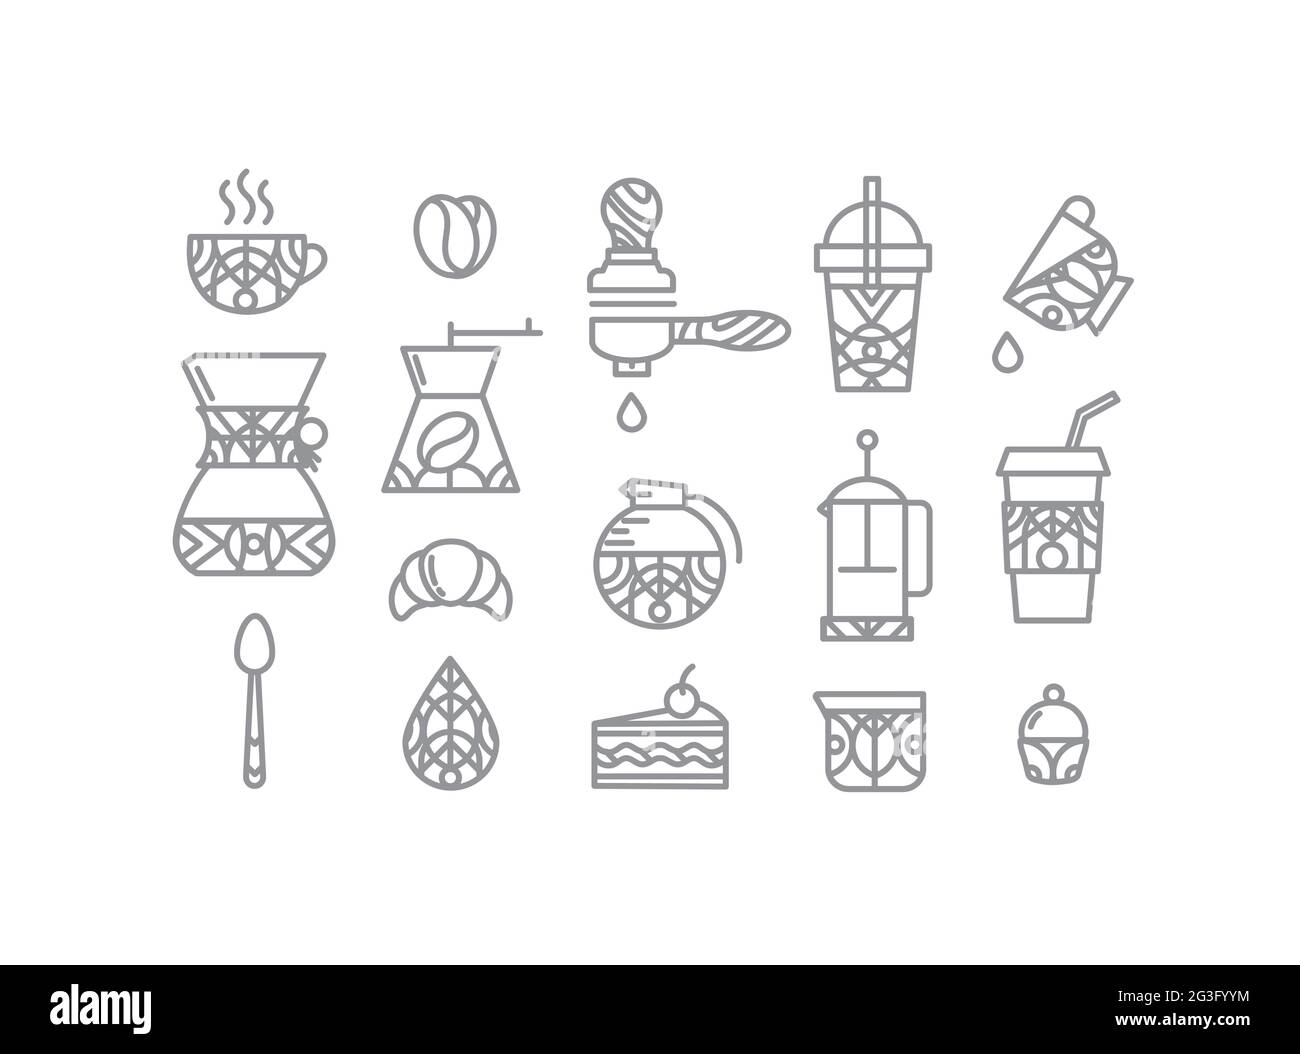 Coffee icons in flat style drawing by thin grey lines on white background Stock Vector